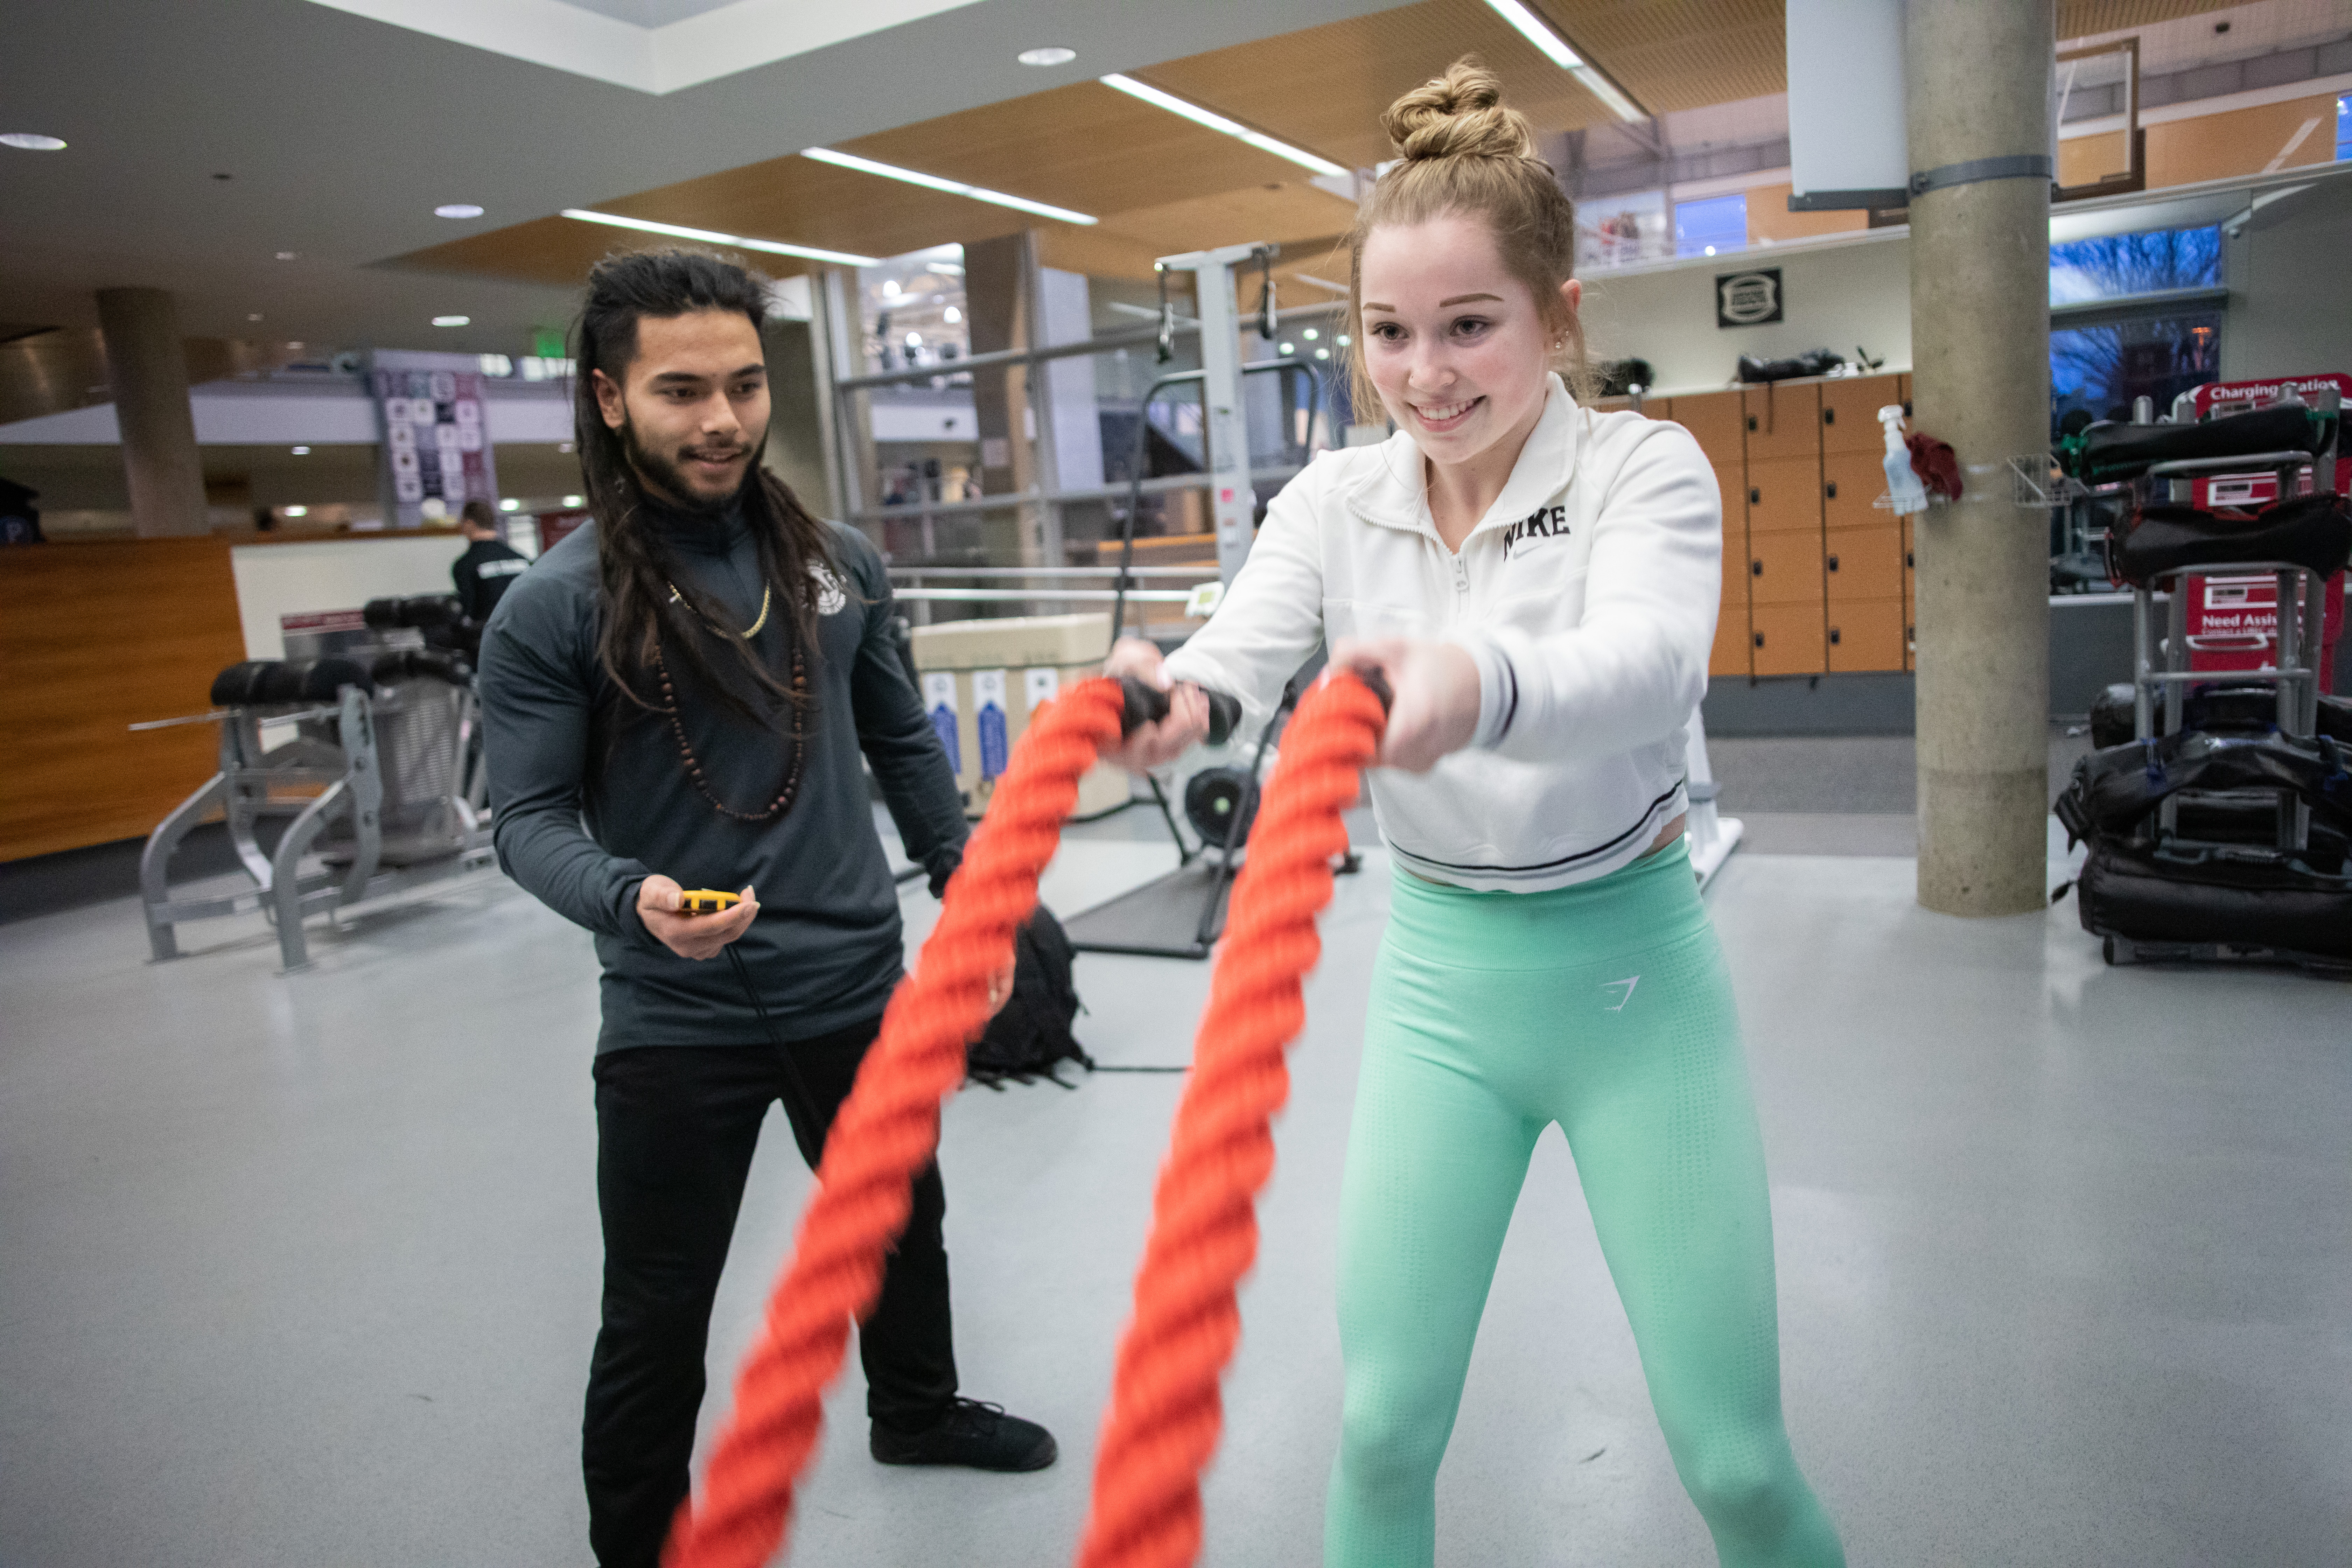 A student works with a personal trainer on strength training at the SRC